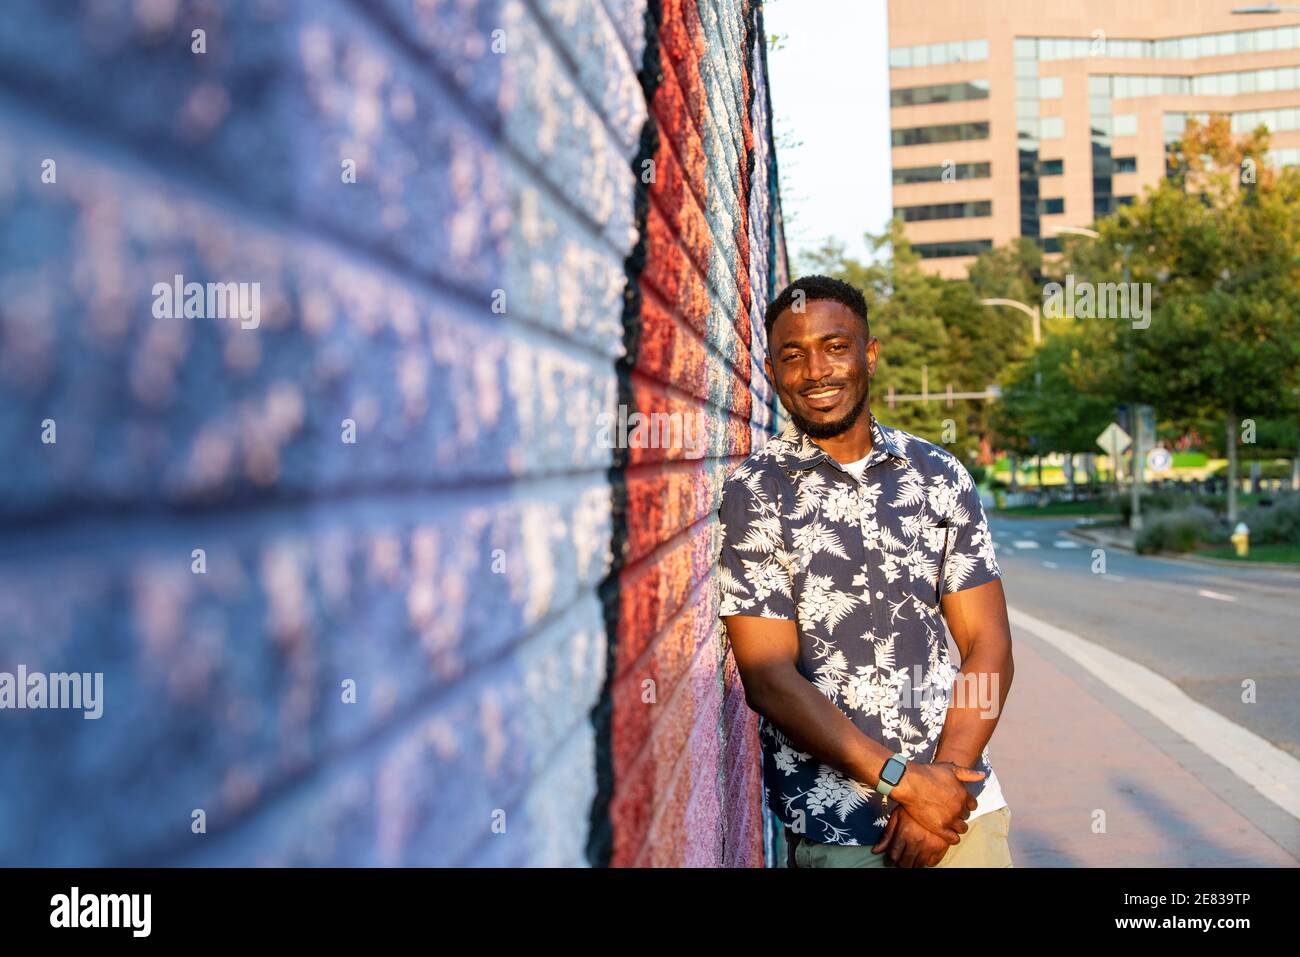 A Black man leans against a colorful street mural and smiles at the camera. Stock Photo